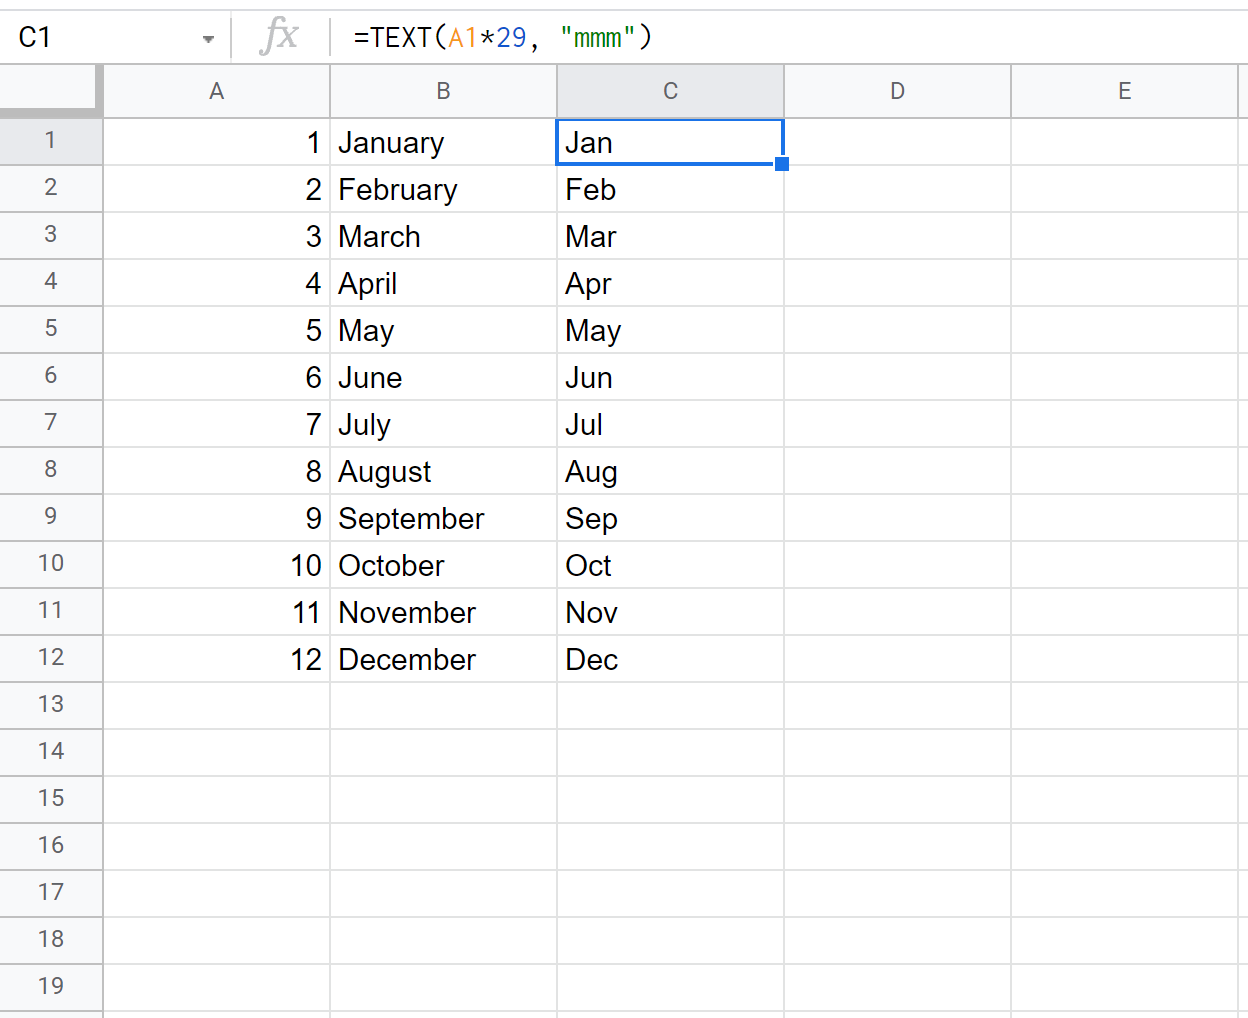 convert month number to abbreviated month name in Google Sheets